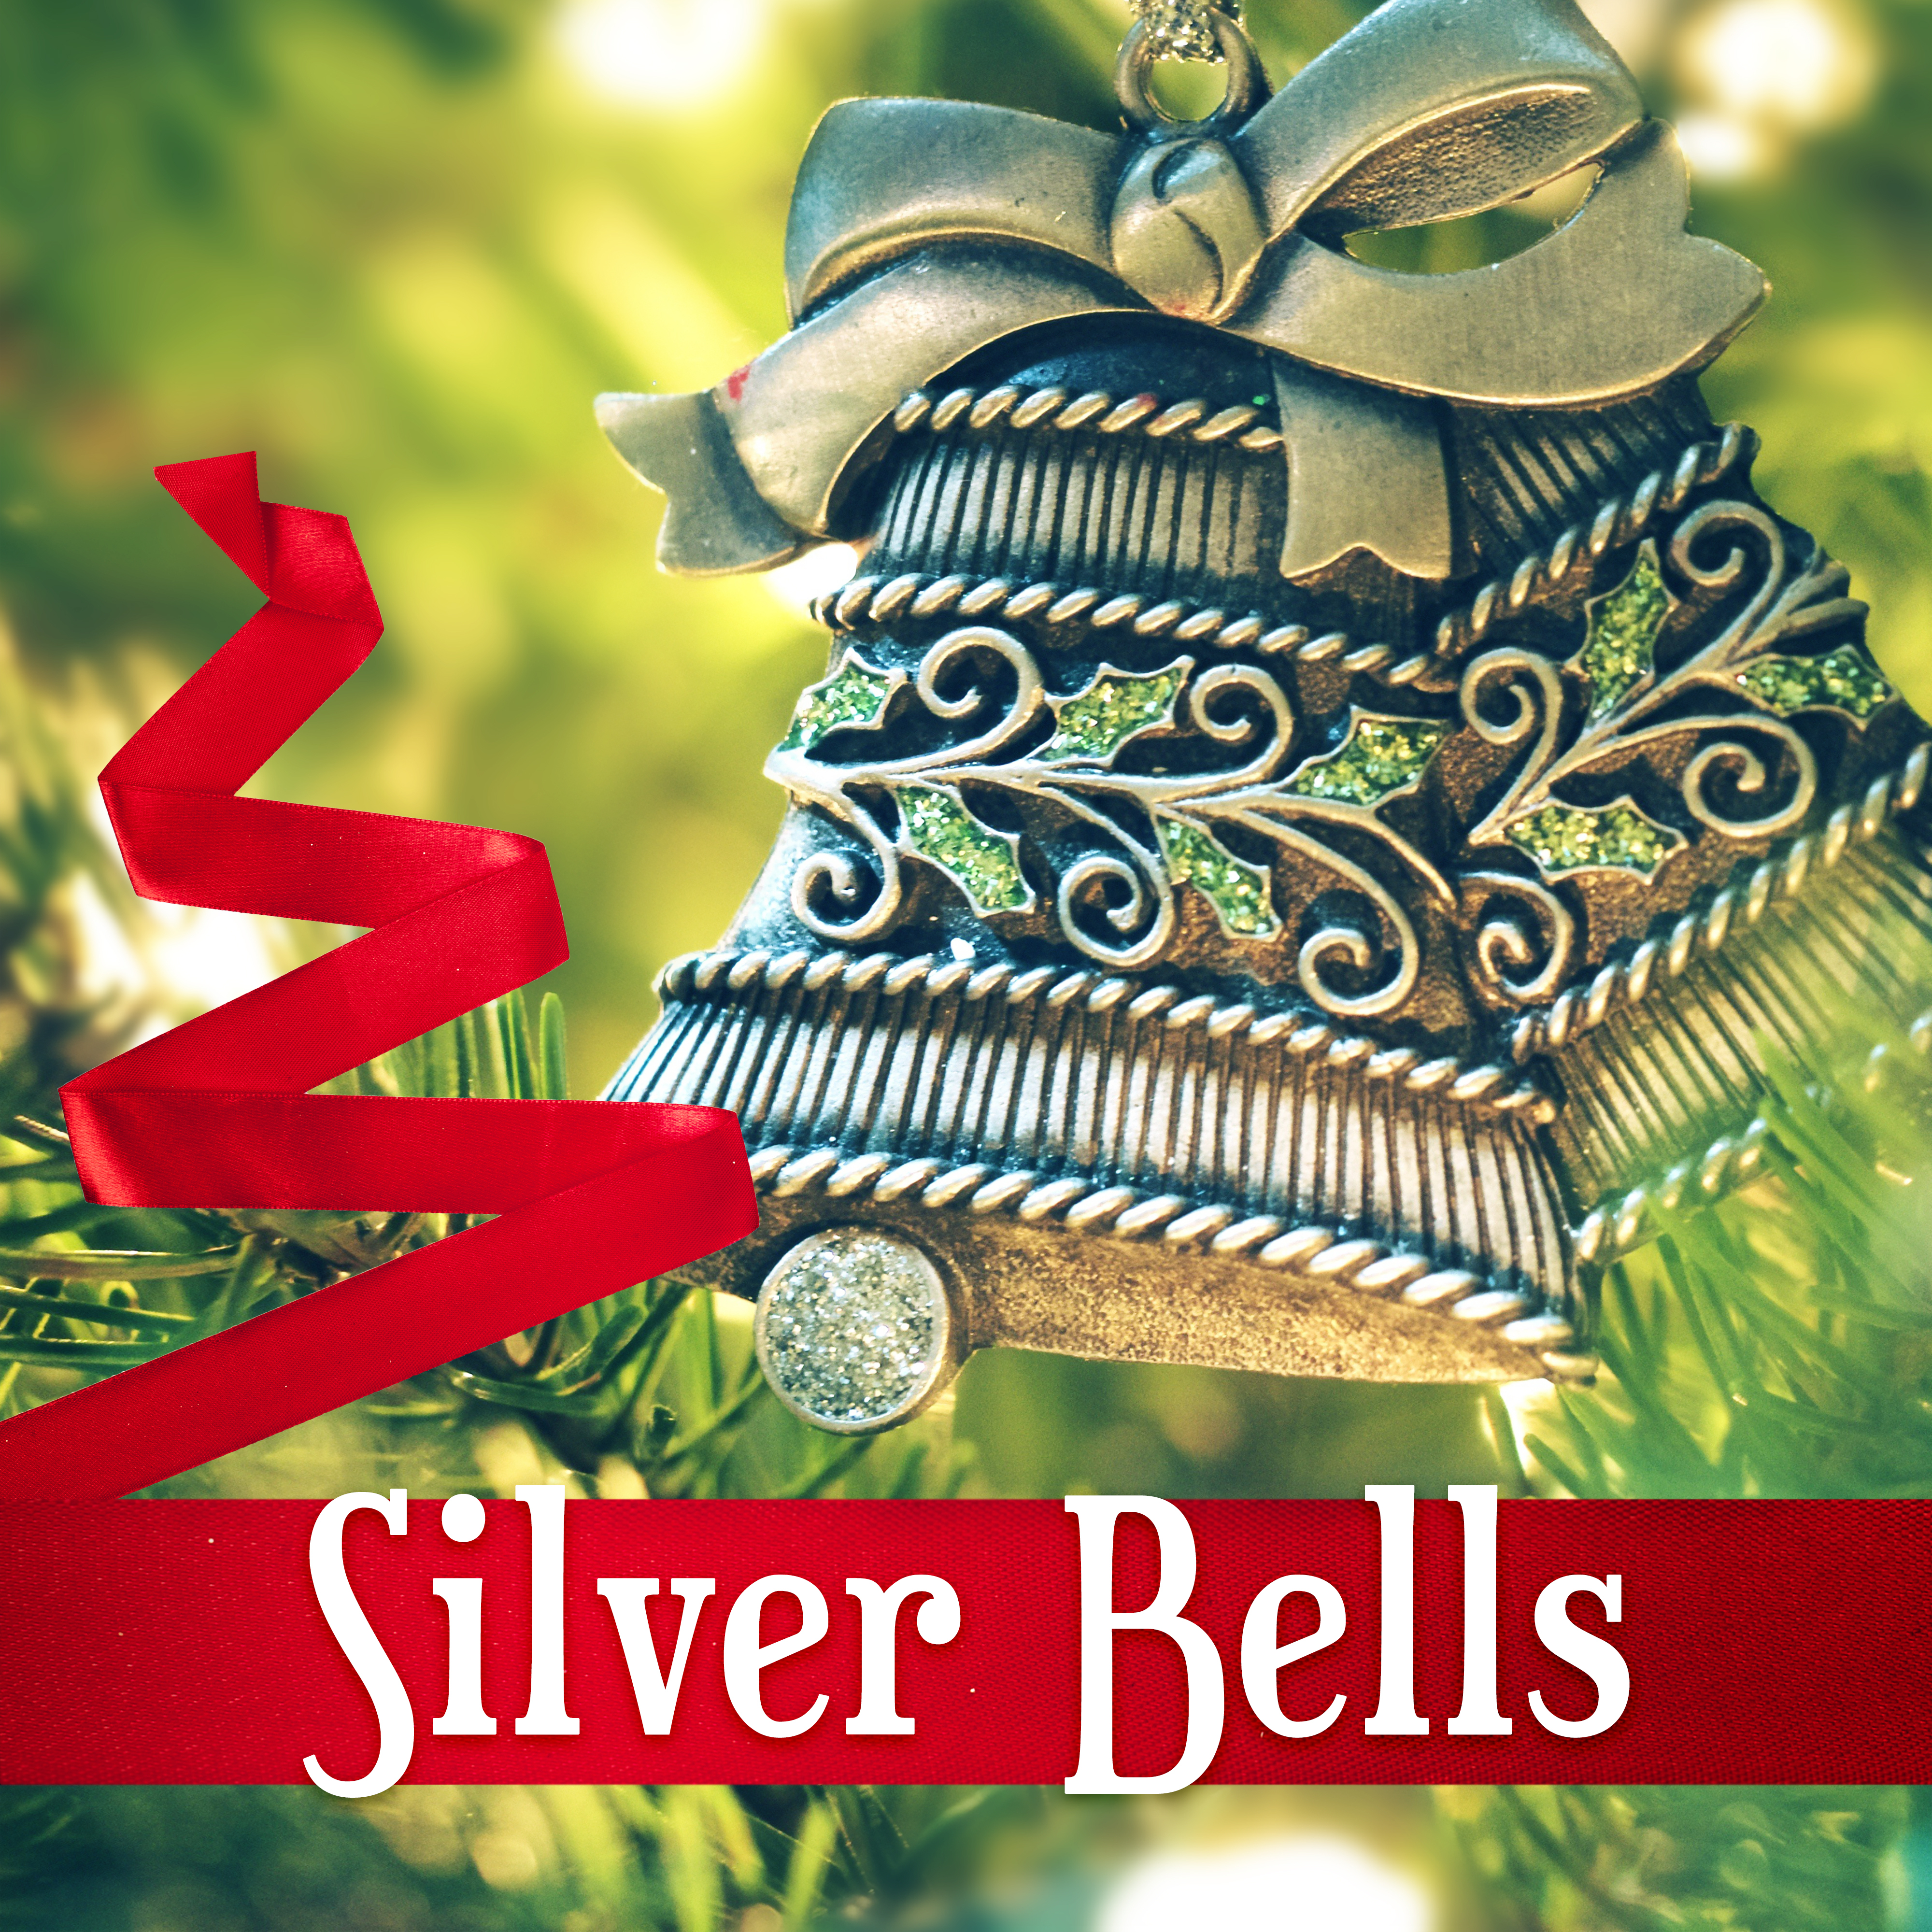 Silver Bells – Christmas Time, Traditional Carols, White Christmas with Family, Piano Songs, Wonderful Holiday, Falling Snow, Happy Christmas